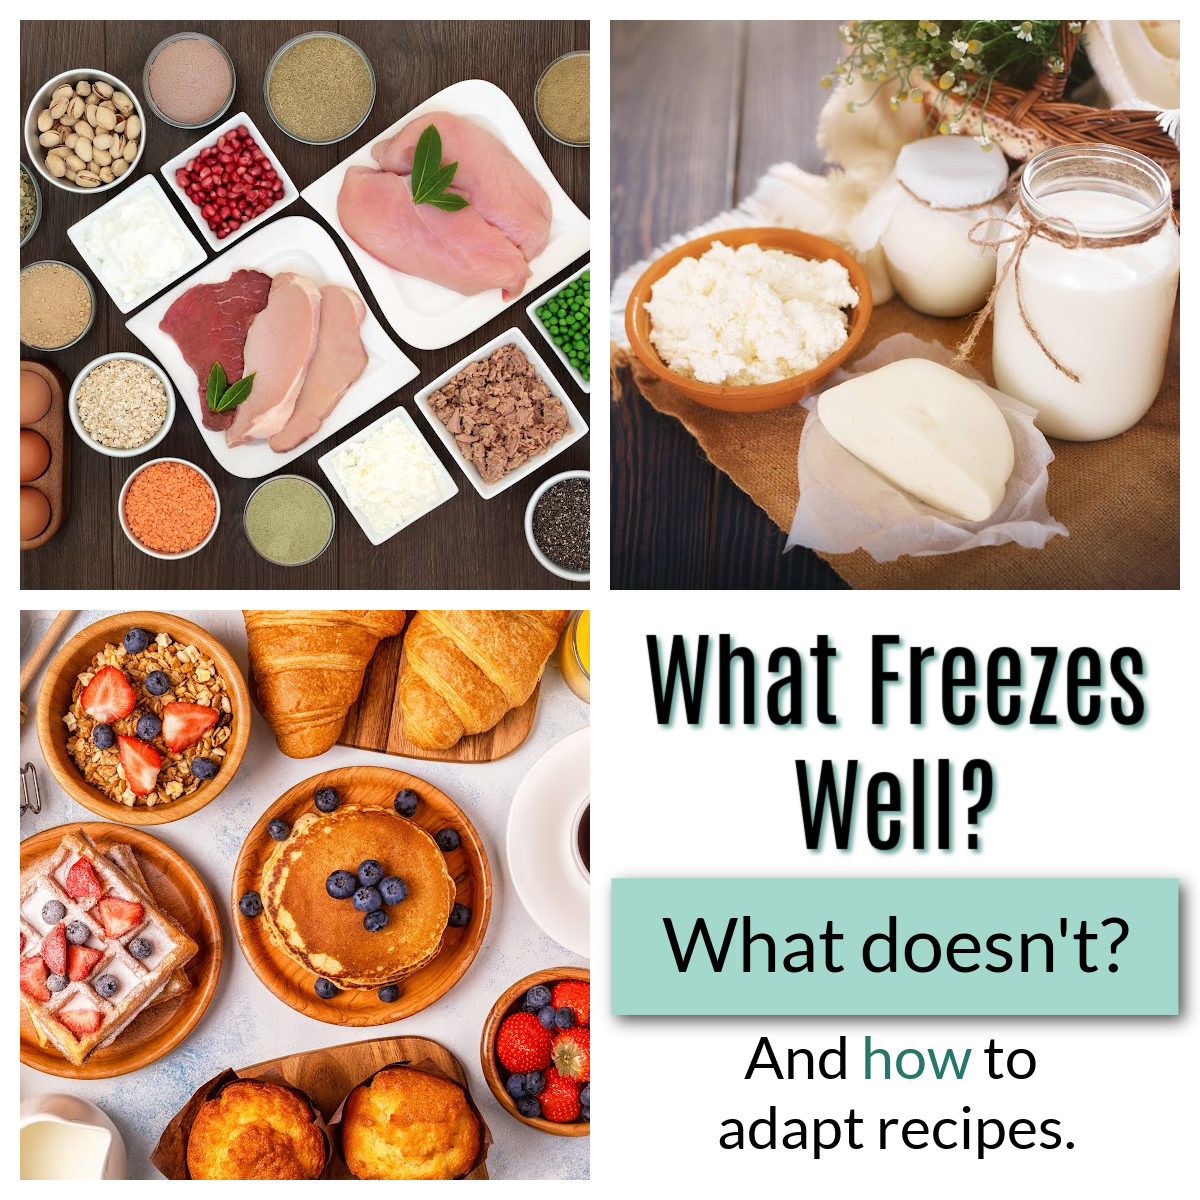 What Freezes Well, What Doesn’t and How to Adapt Recipes